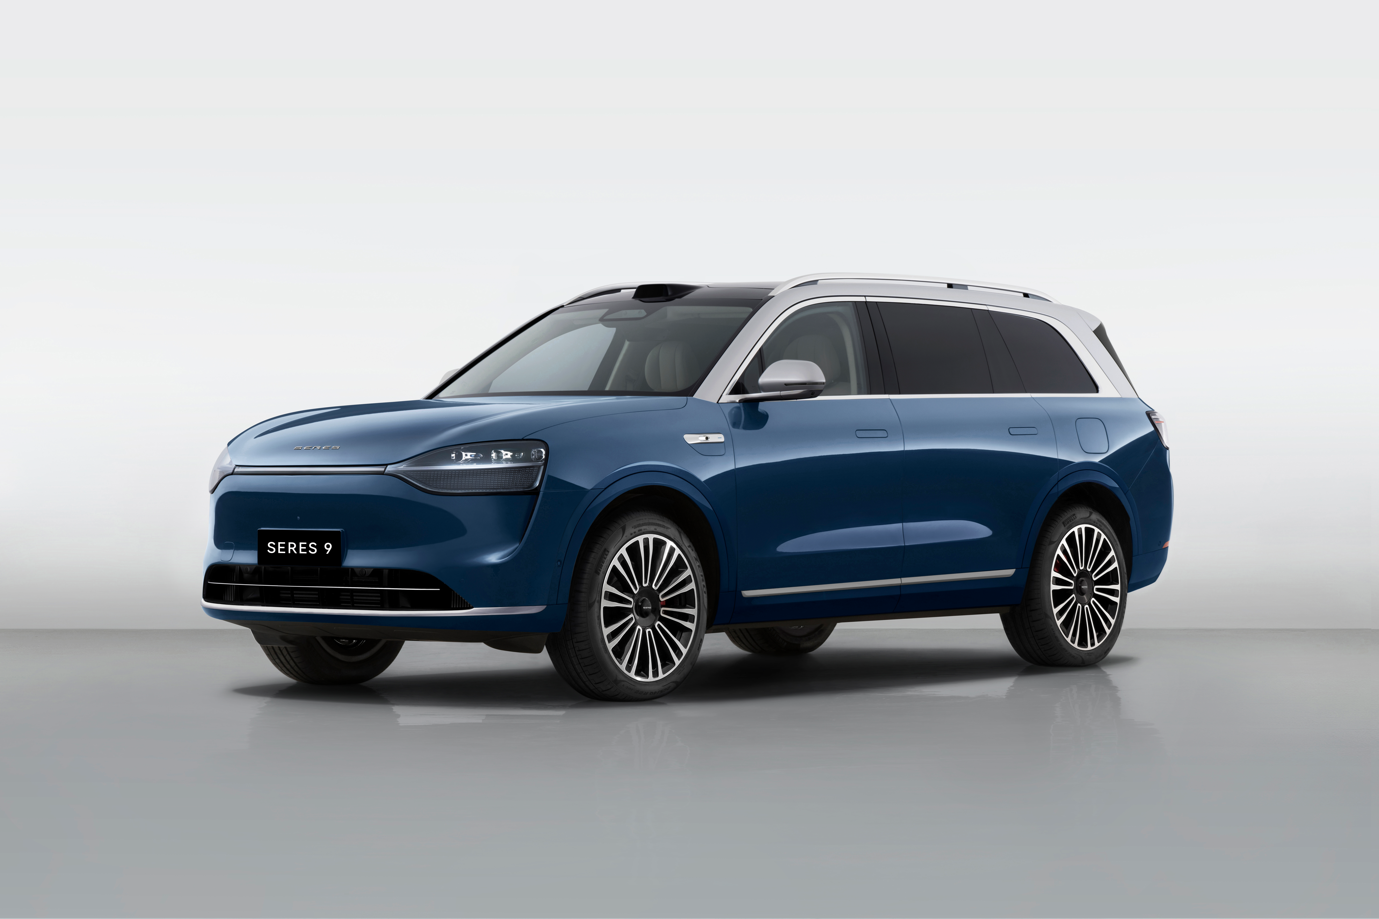 SERES 9: the flagship full-size luxury SUV